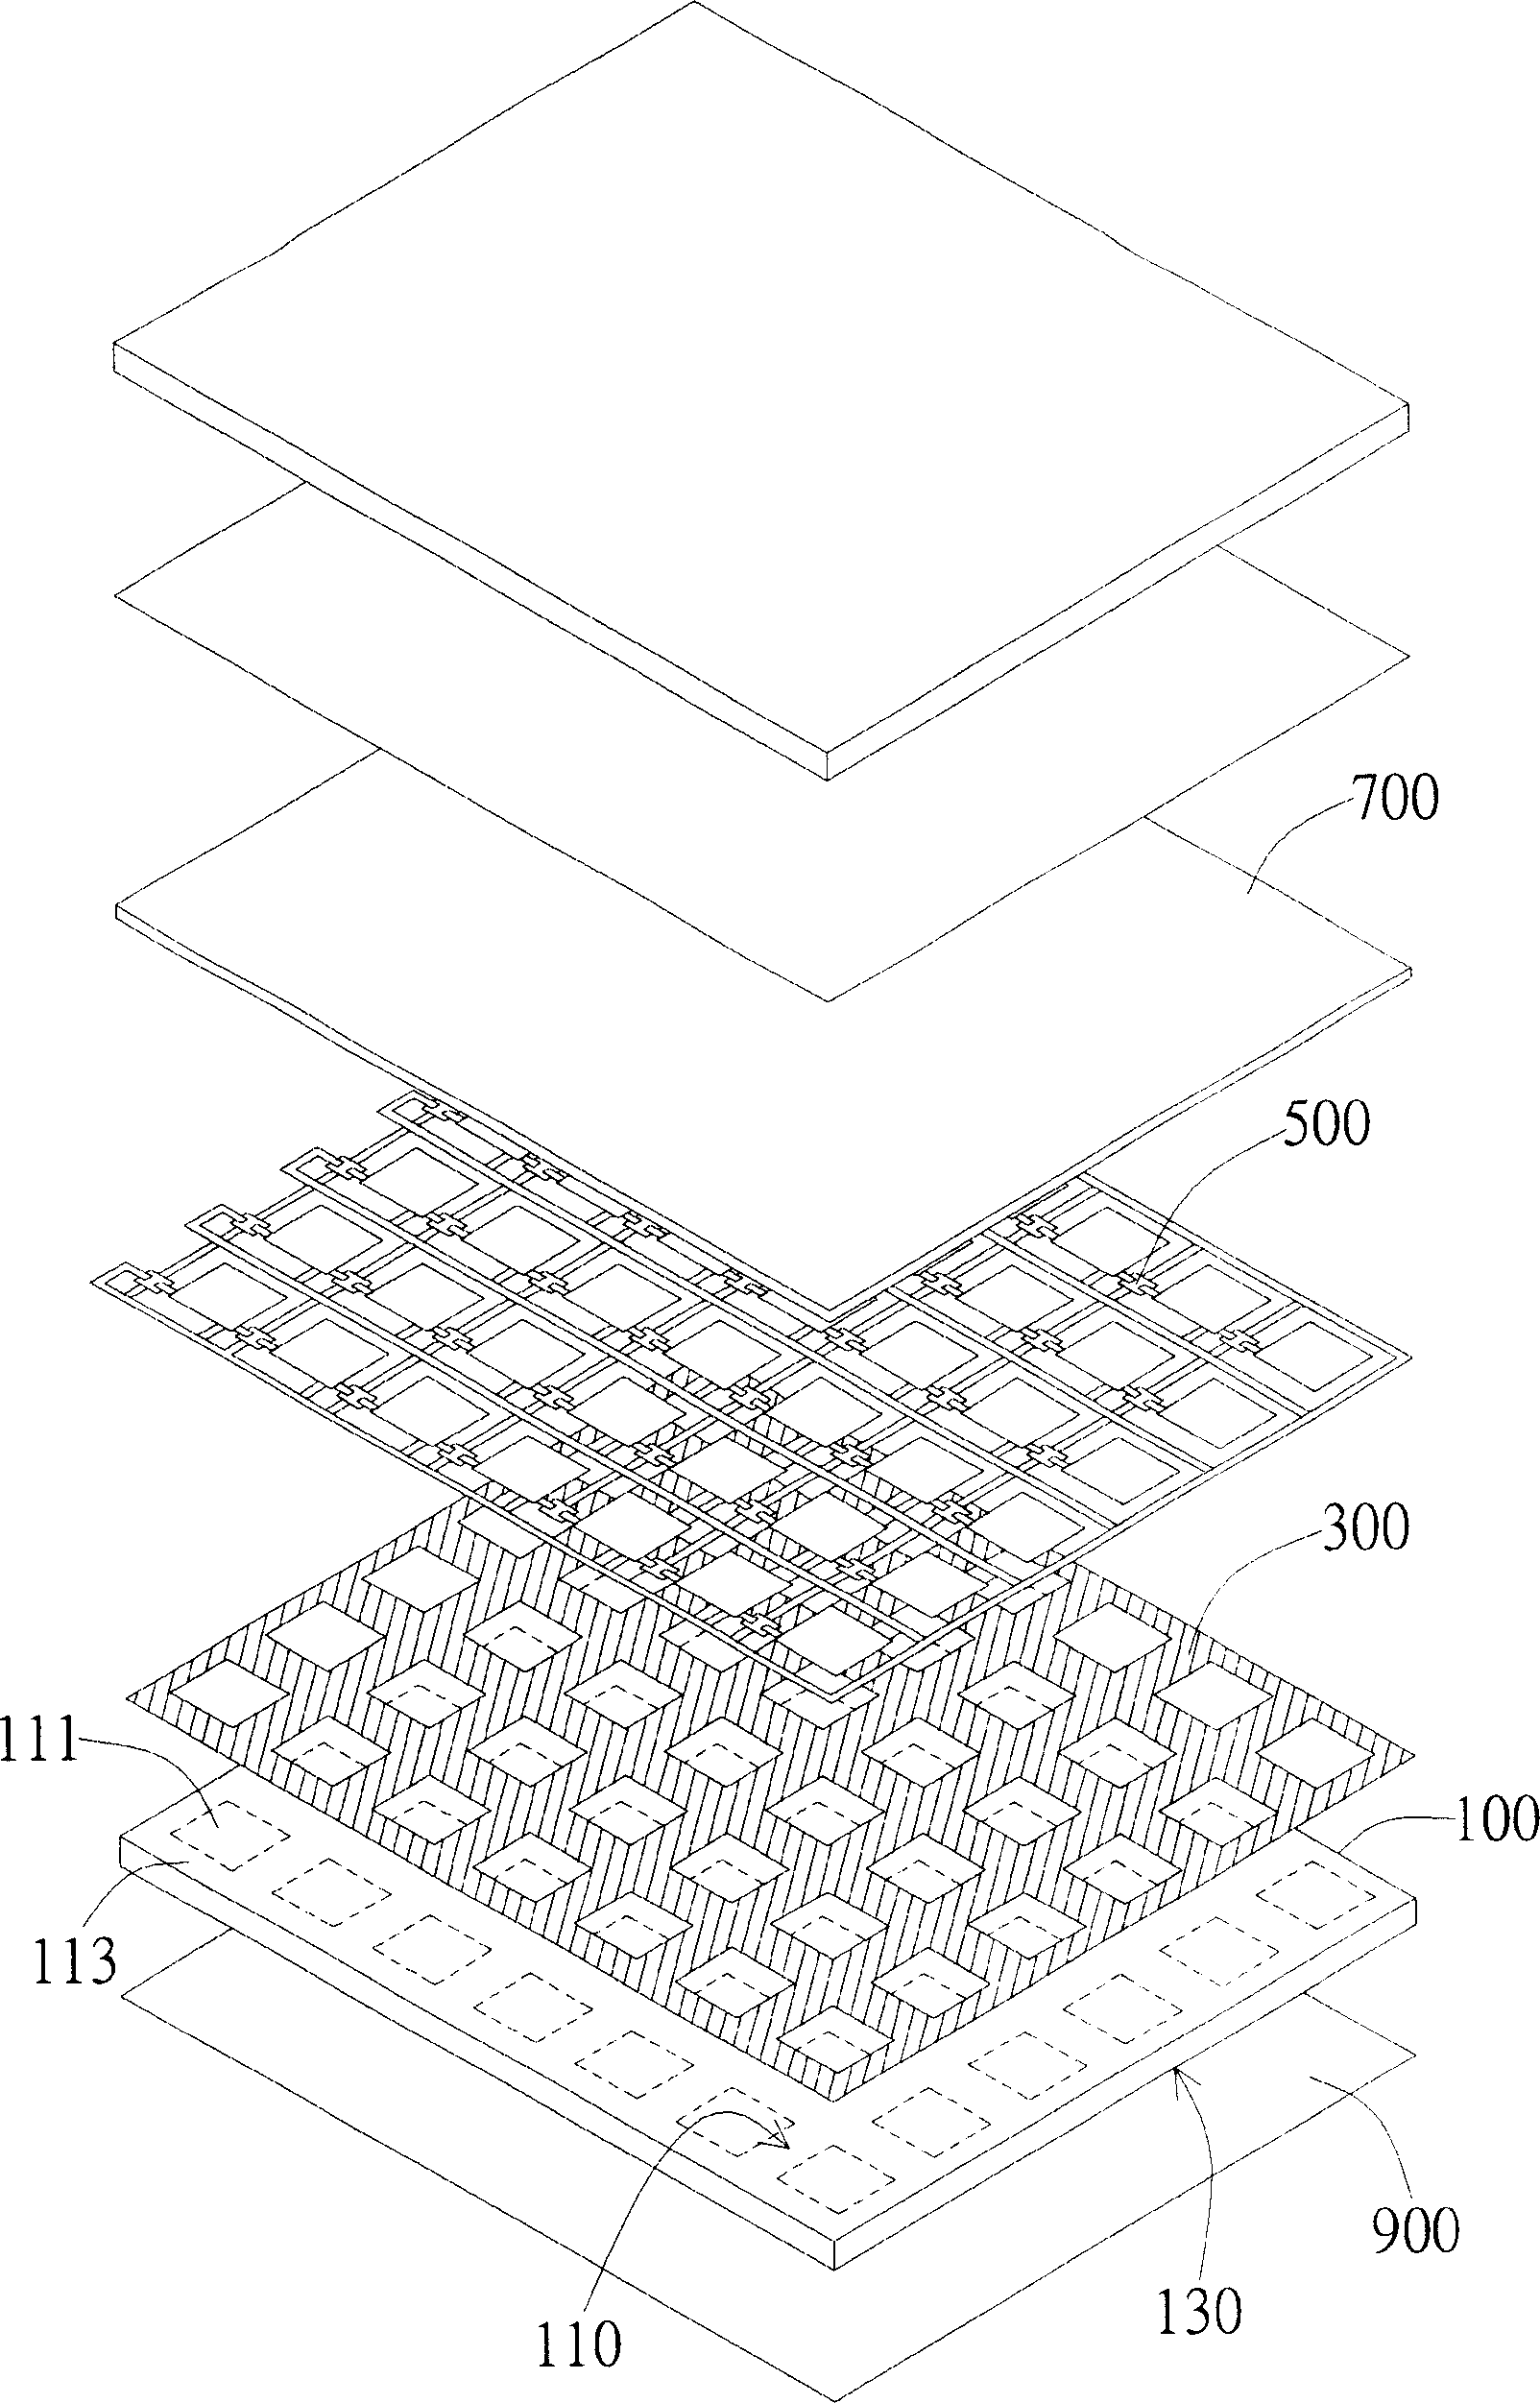 Display in low reflectivity built from self-luminescence elements